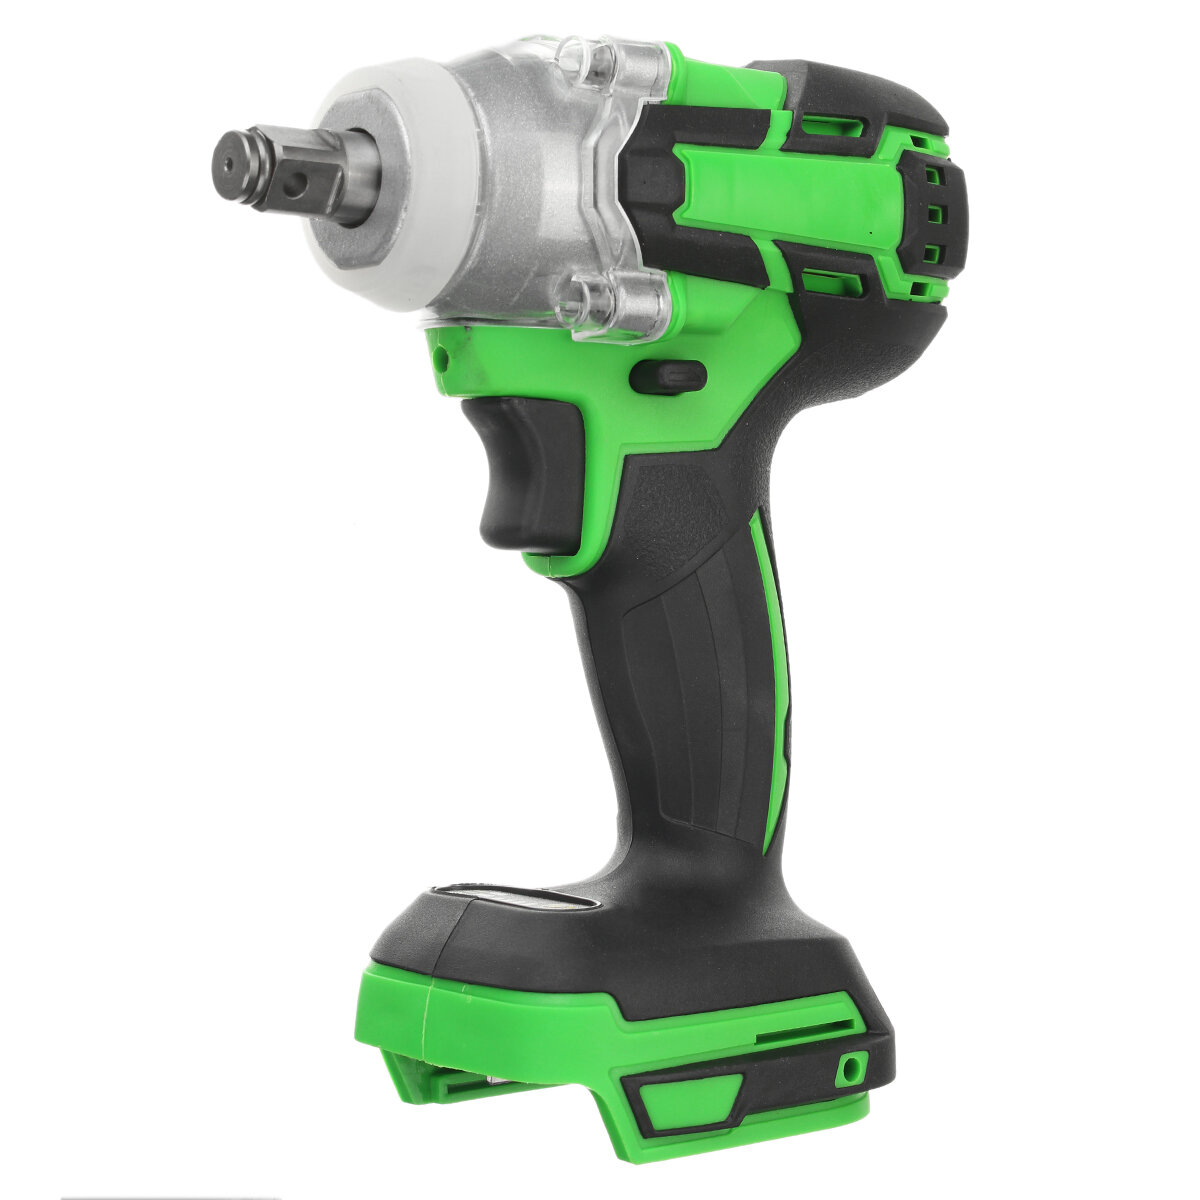 520N.M Torque Brushless Impact Wrench Screwdriver Cordless Rechargable Electric Wrench Driver Tool...